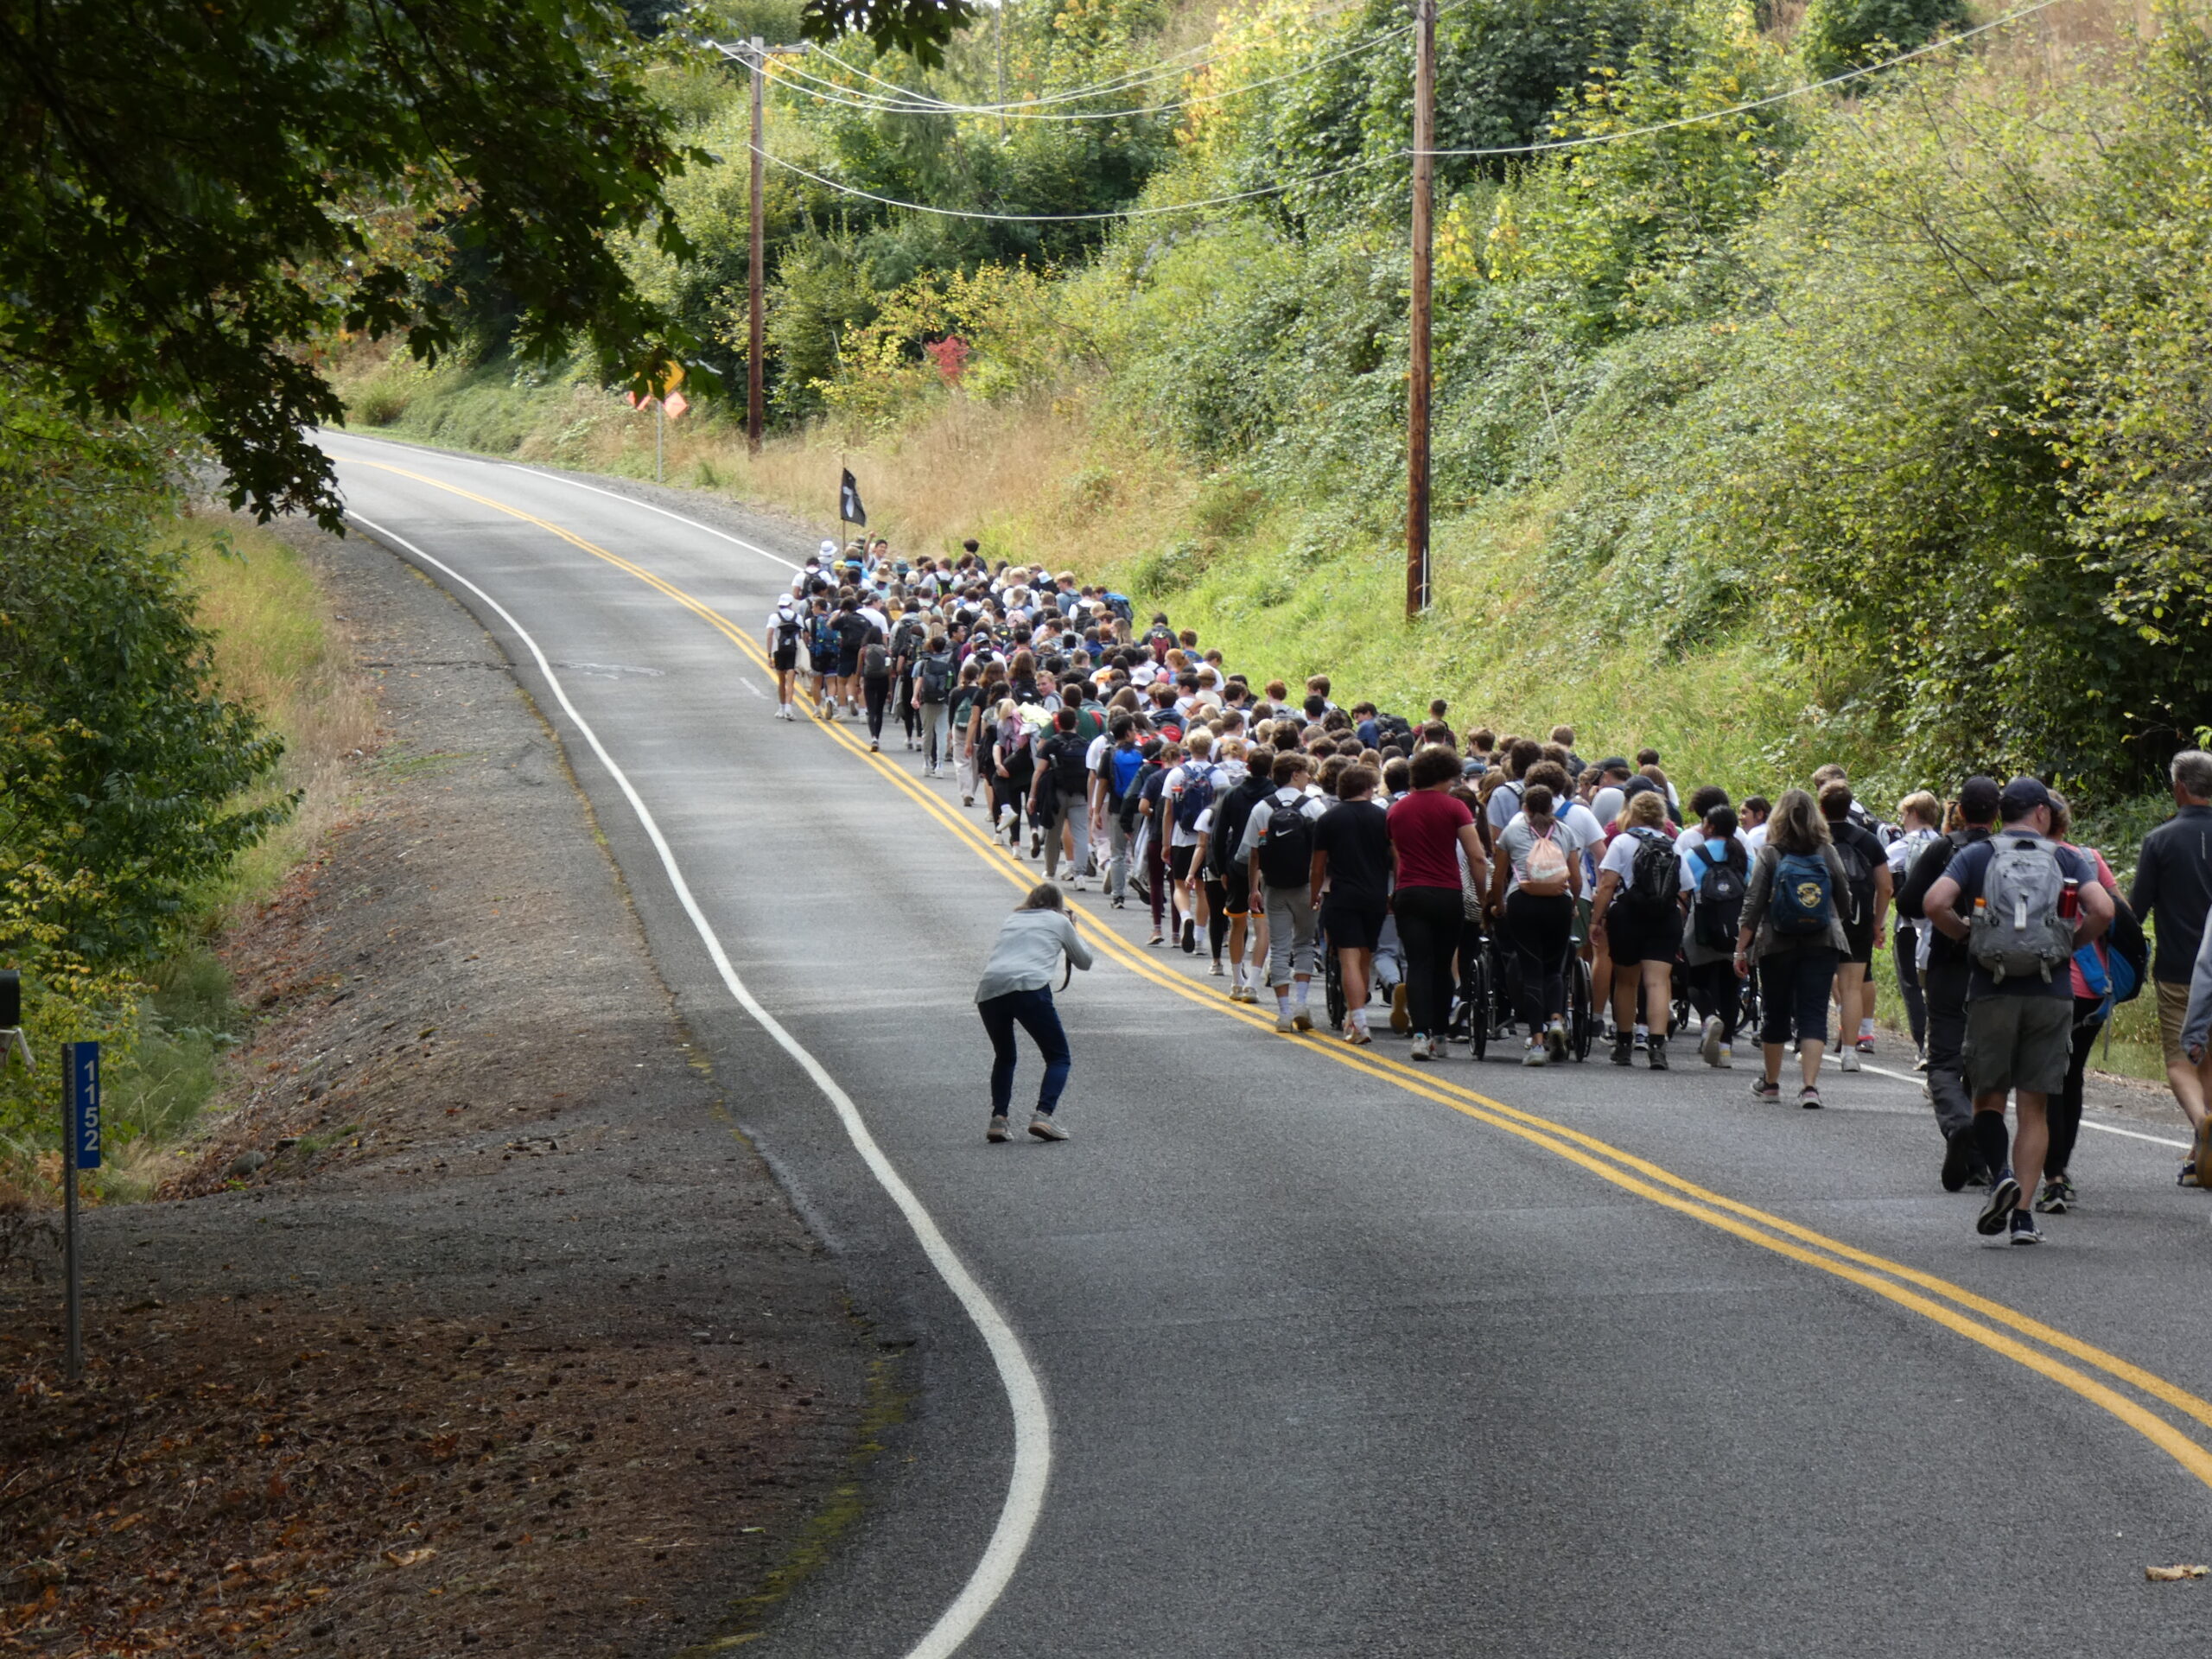 The senior class of 2022 walked the pilgrimage as the current class will do on Saturday, September 16th.